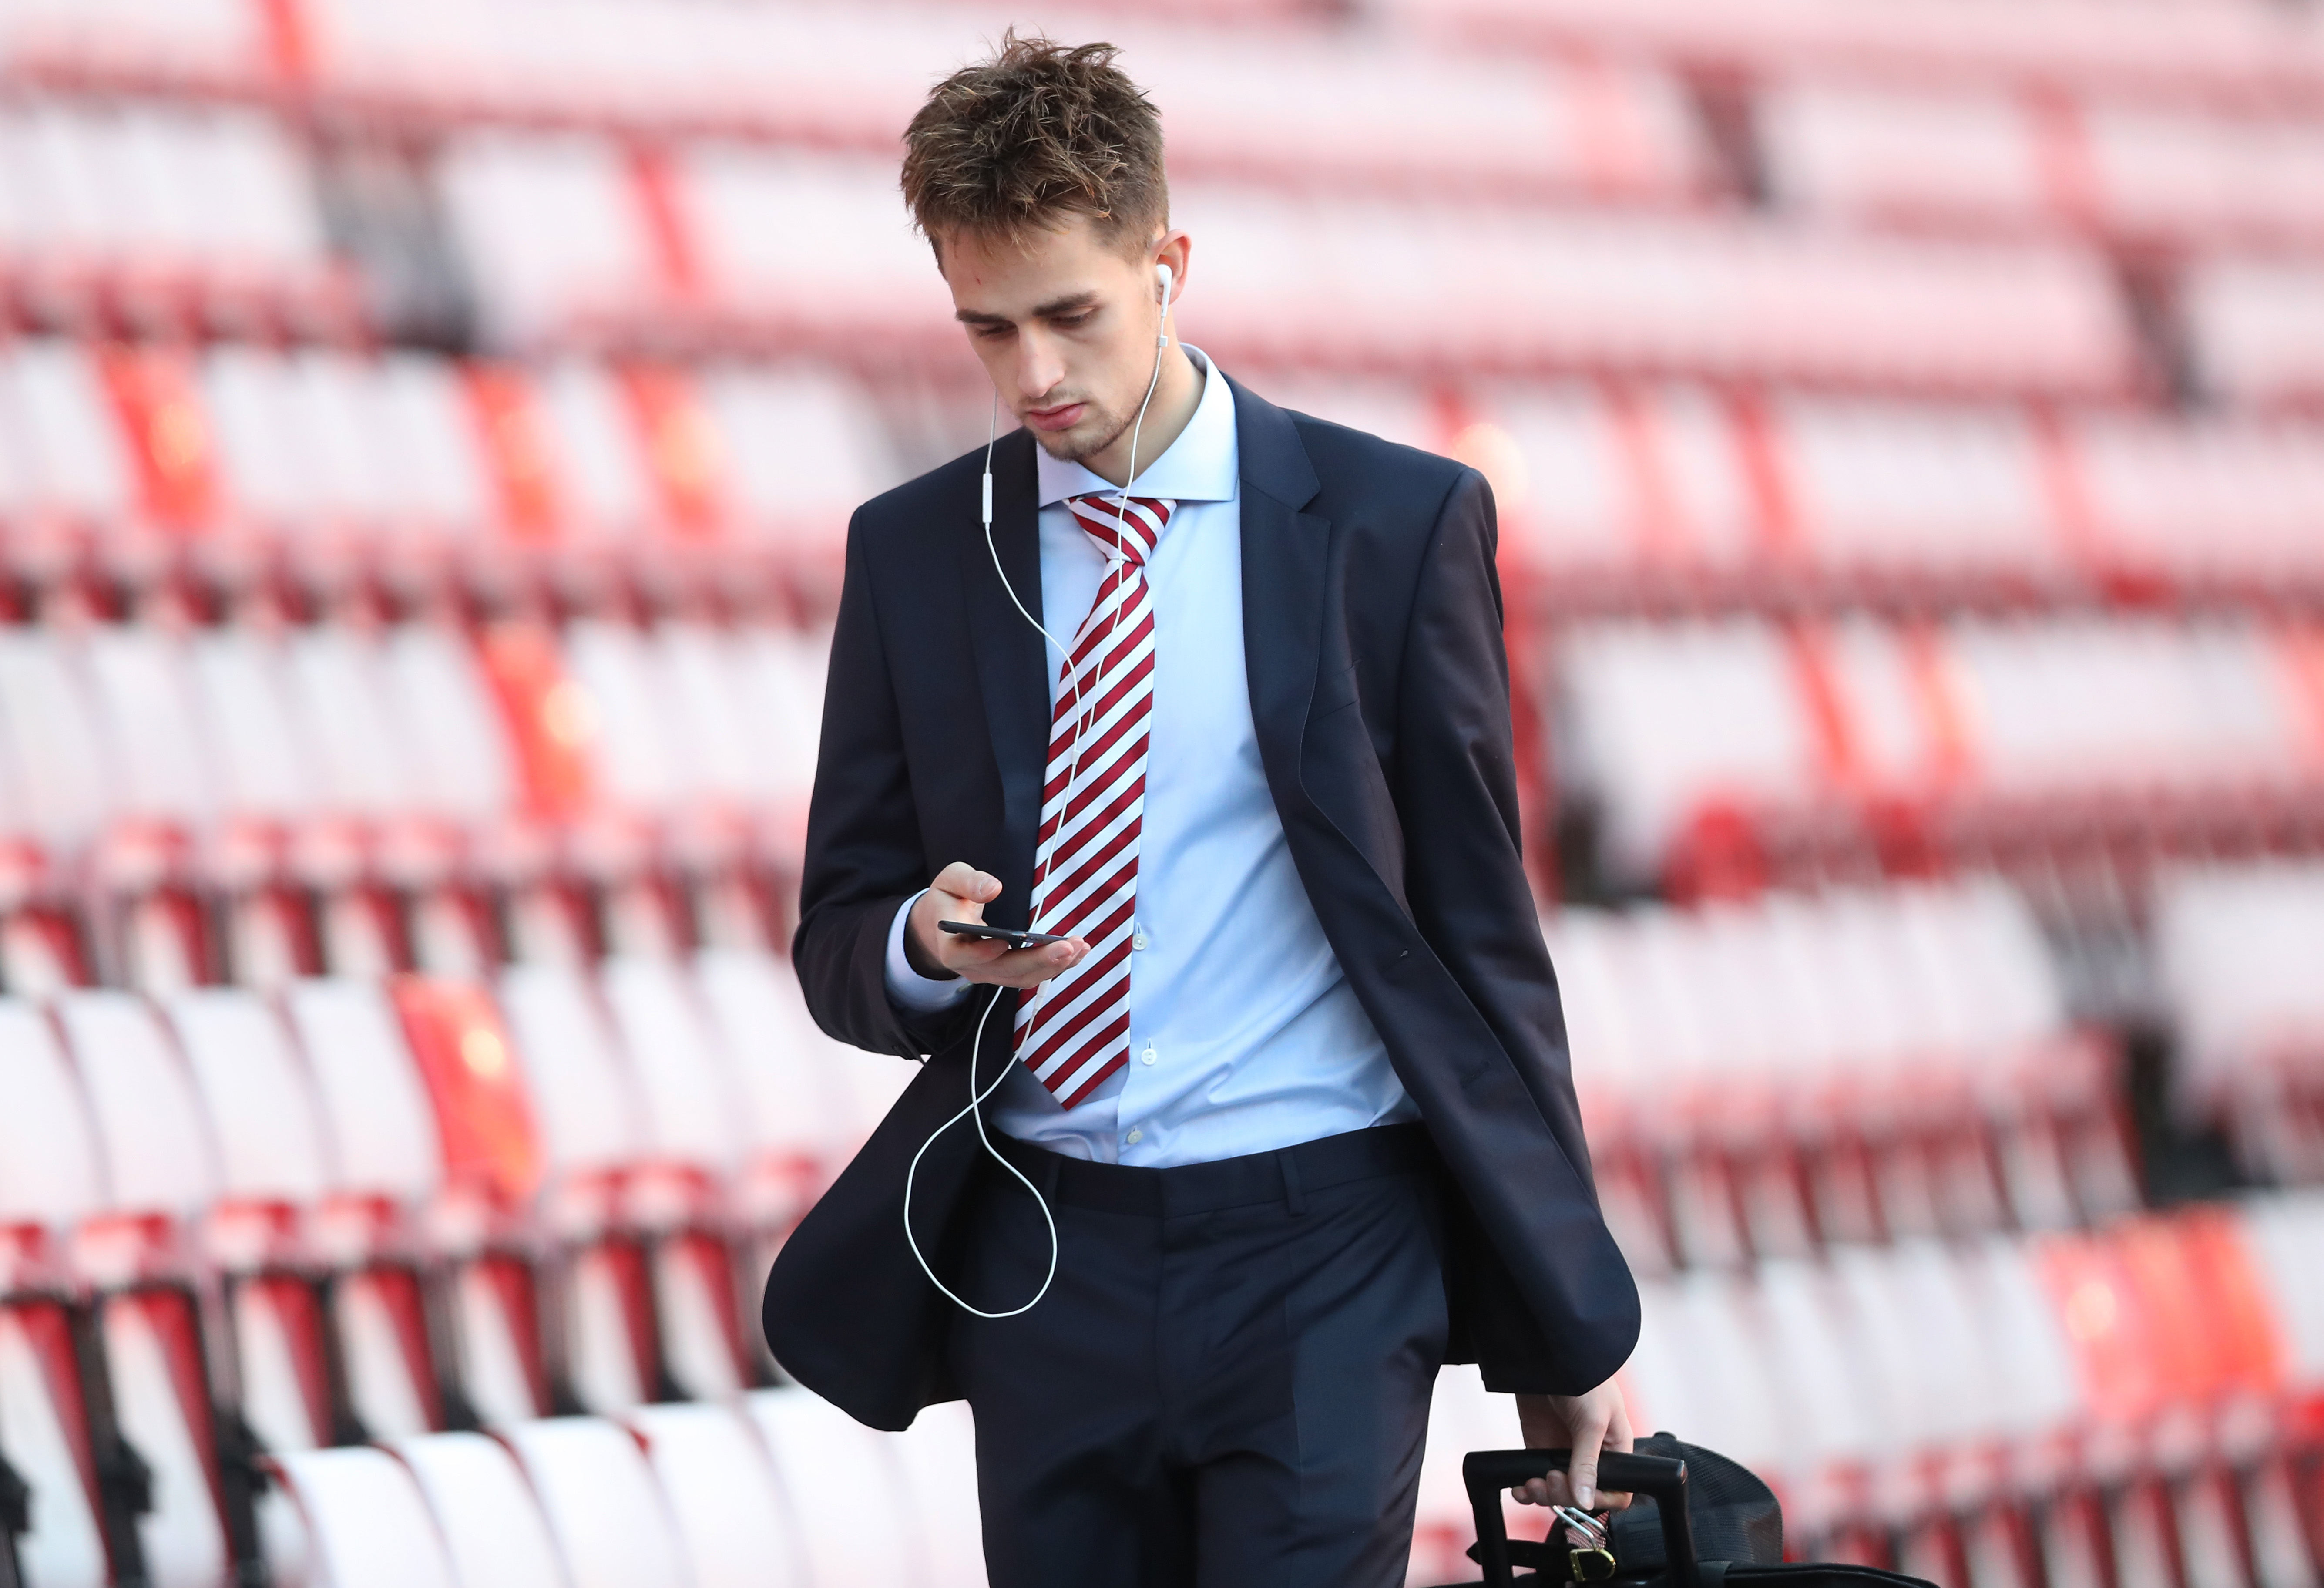 SUNDERLAND, ENGLAND - JANUARY 02:  Adnan Januzaj of Sunderland arrives at the stadiium prior to the Premier League match between Sunderland and Liverpool at Stadium of Light on January 2, 2017 in Sunderland, England.  (Photo by Ian MacNicol/Getty Images)